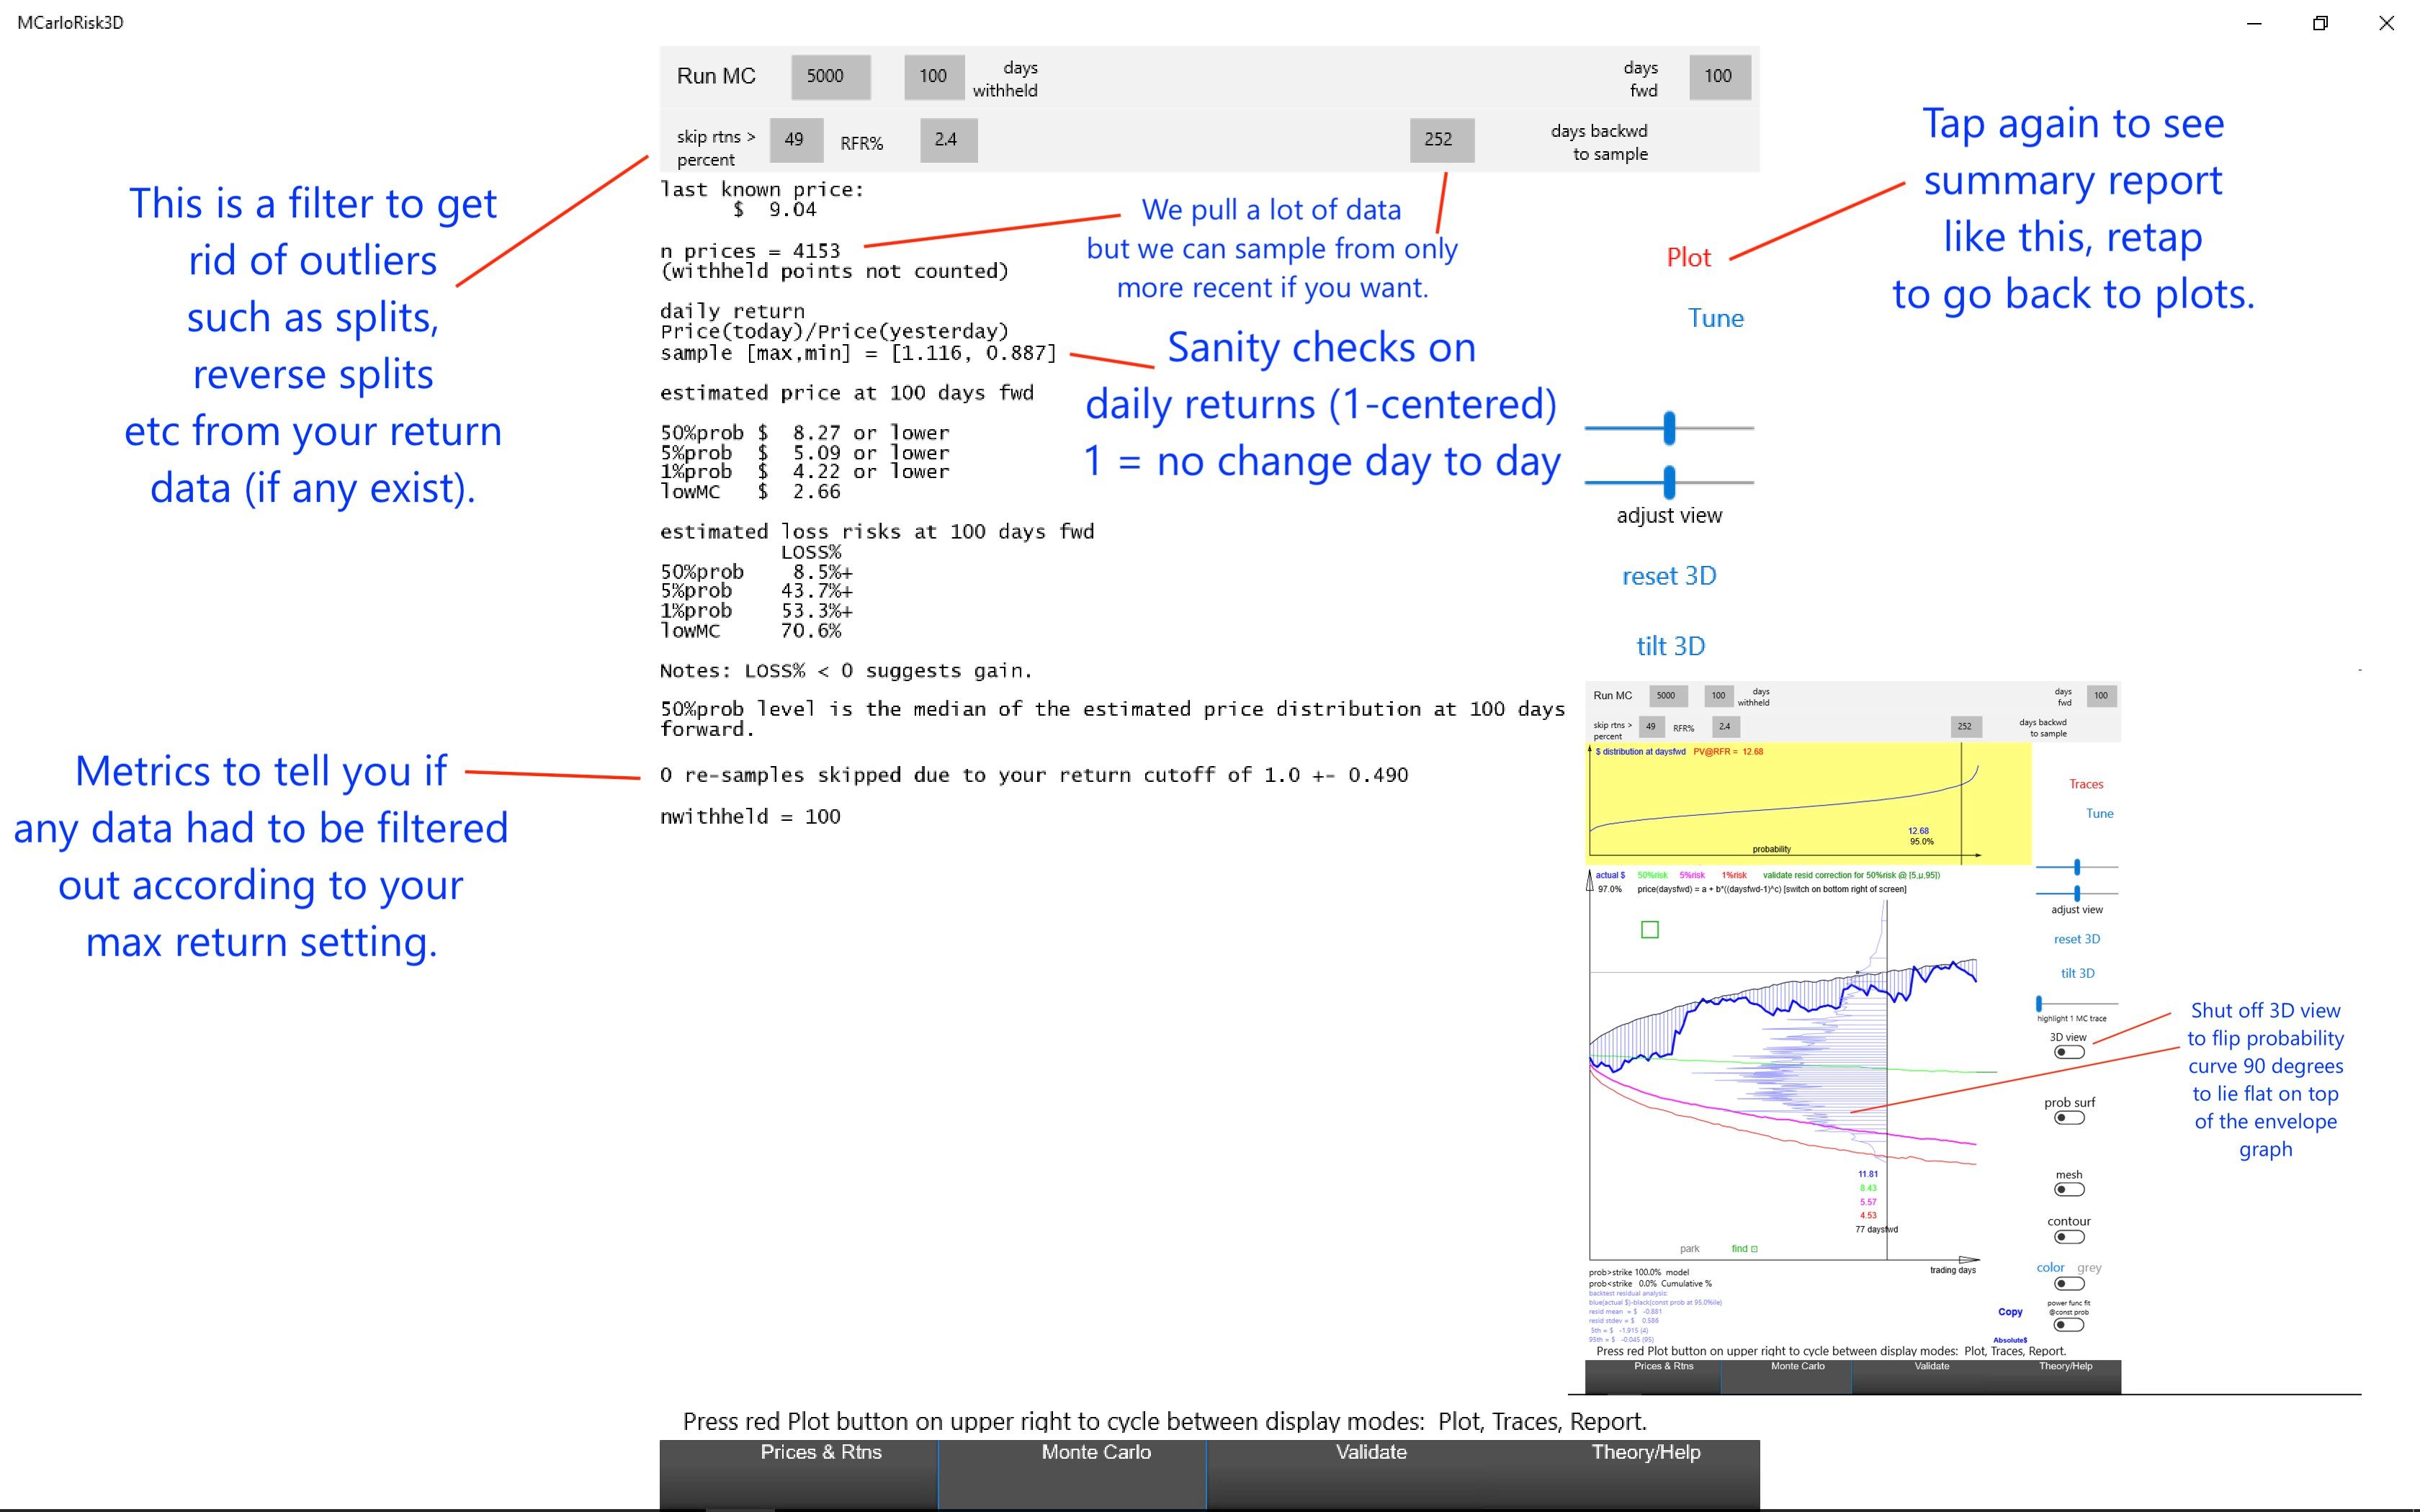 These screen shots show a summary report of a bulk backtest, and the ability to flip (price, probability) curve flat onto the (time, price) plane if 3D views make you dizzy.